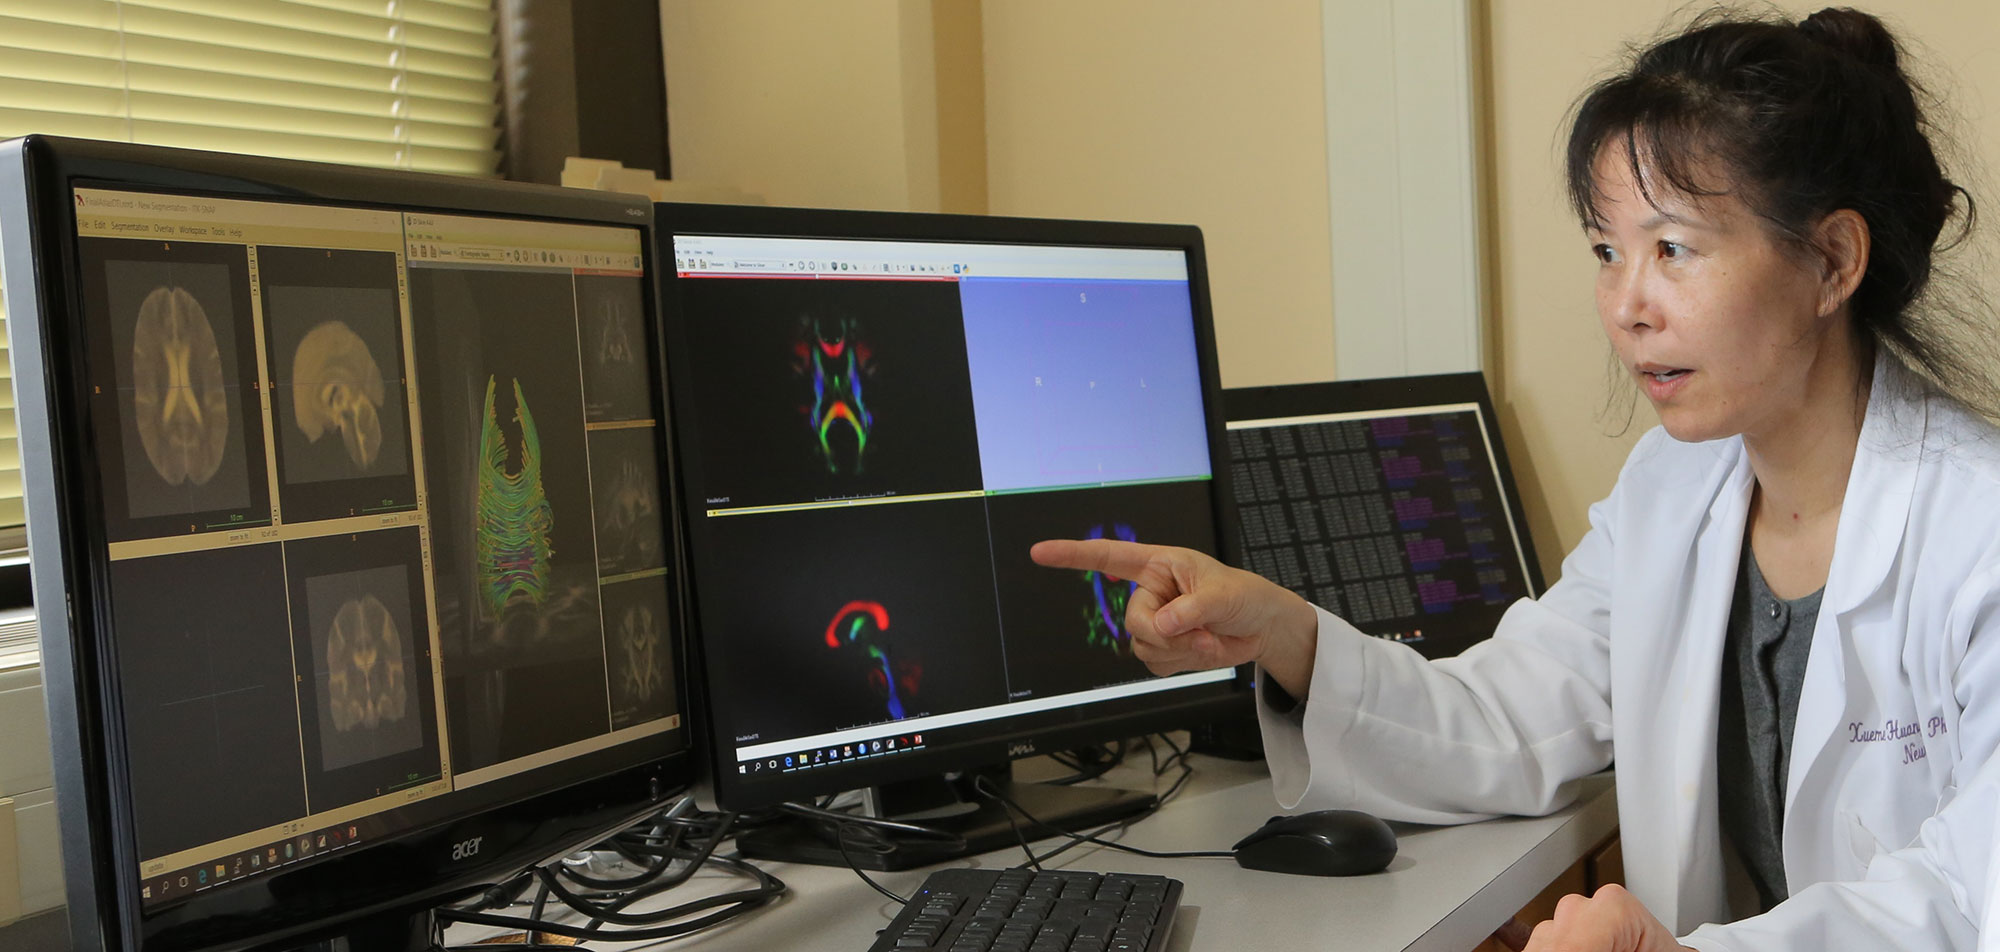 Dr. Xuemei Wang, Distinguished Professor and Vice Chair for Research in the Department of Neurology at Penn State College of Medicine, gestures toward a computer screen with images of a brain on it.